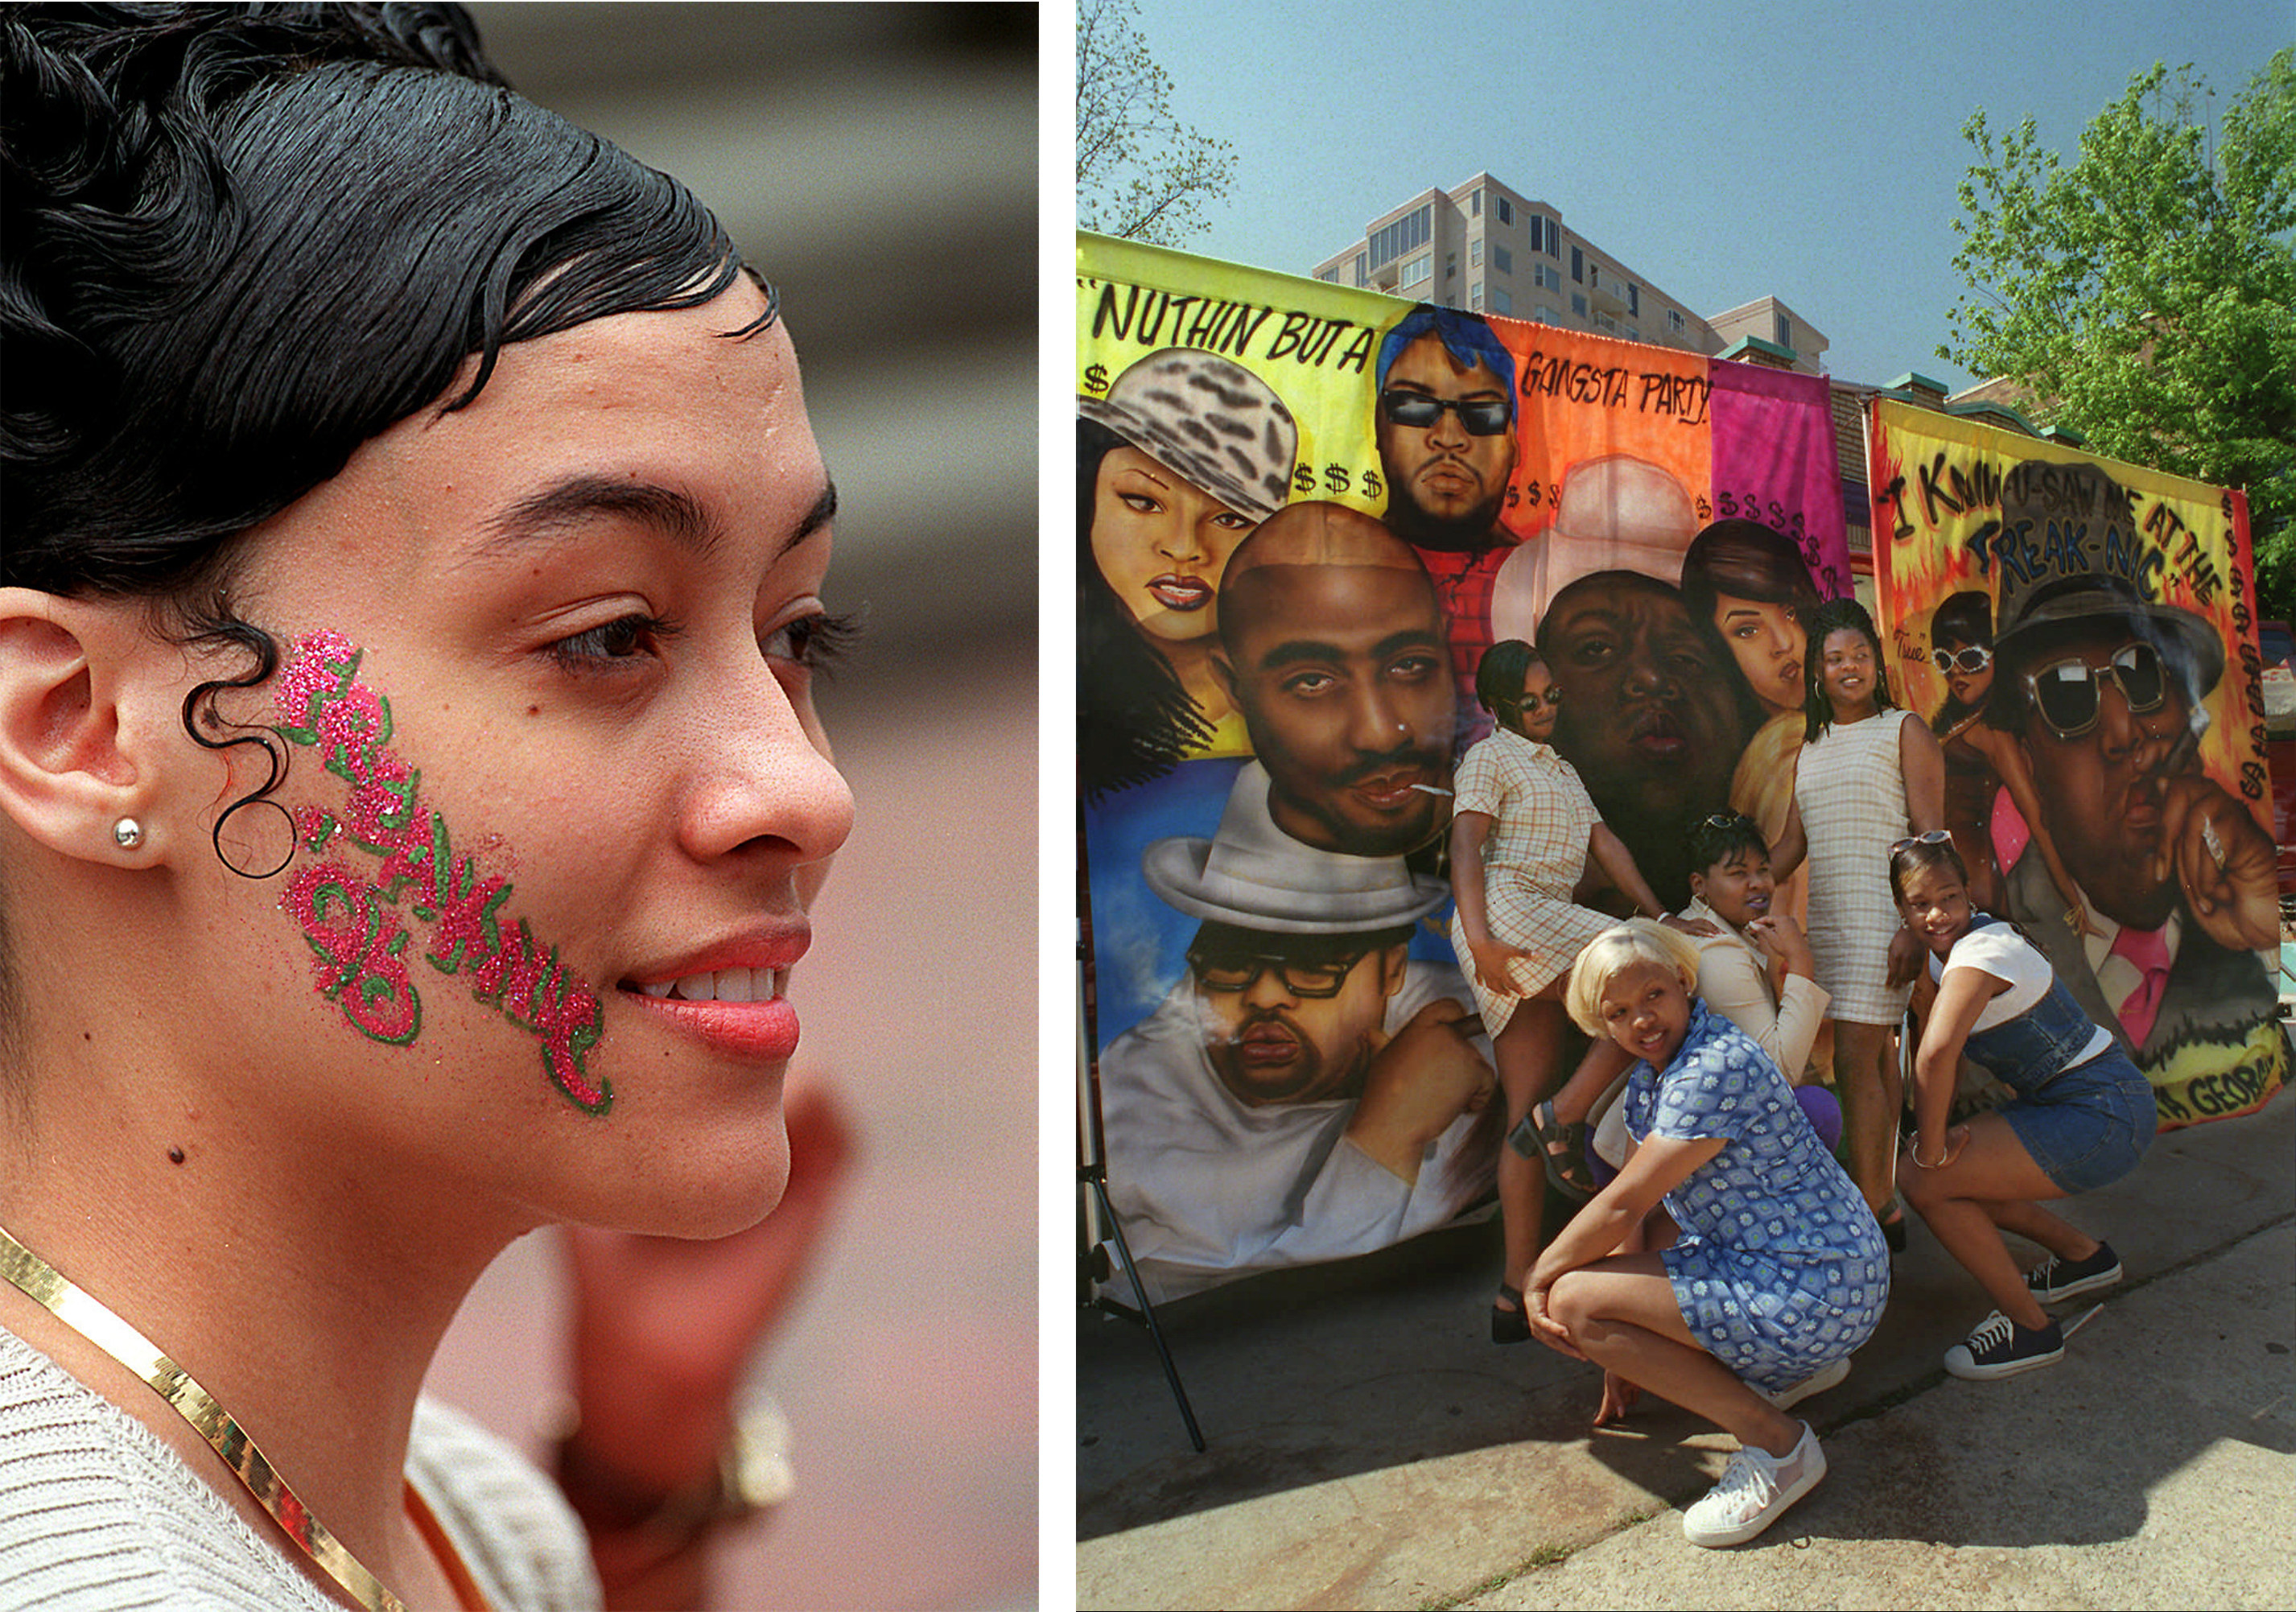 Left, a woman with Freaknik &#x27;96 painted on her face in glitter, and right, five women pose in front of art depicting tupac and other rappers